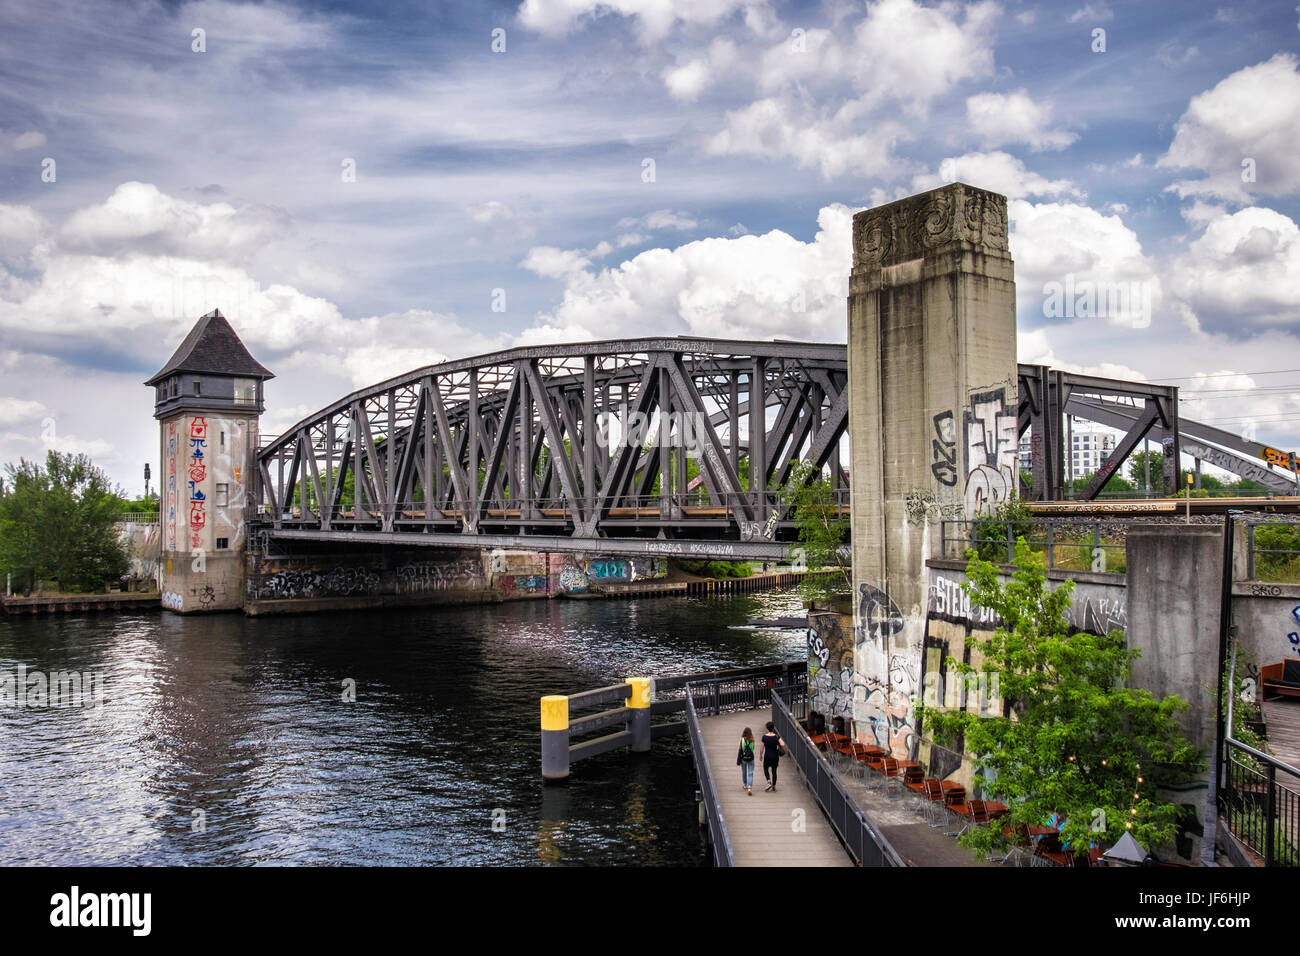 Berlin Treptower Park, Old Iron railway bridge and graffiti covered tower over the river Spree Stock Photo